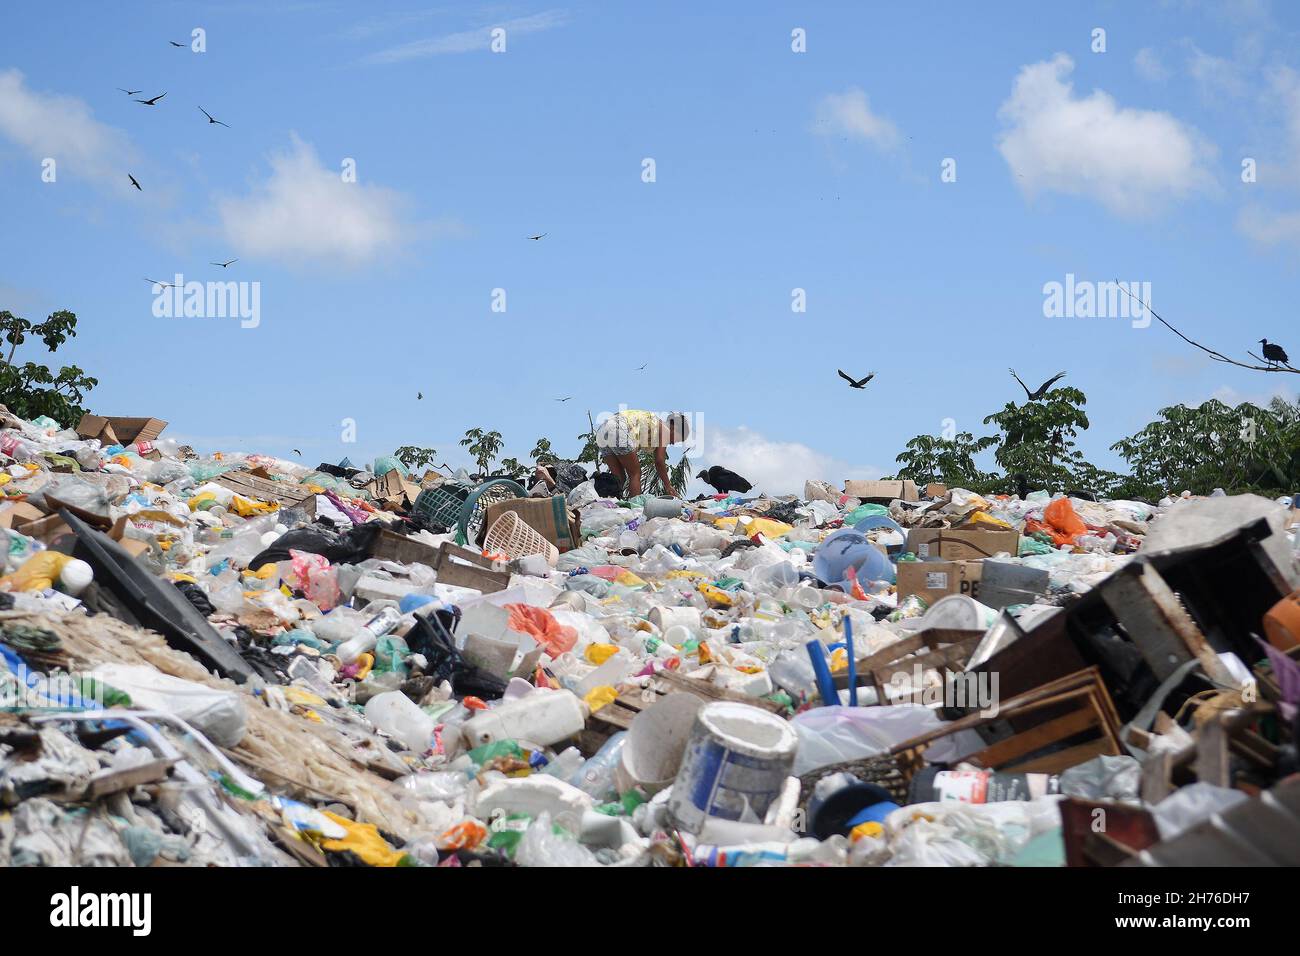 Afuá,Brazil,November 11, 2021. Child working in the dump of the city of Afuá, on the island of Marajó in the state of Pará. Stock Photo